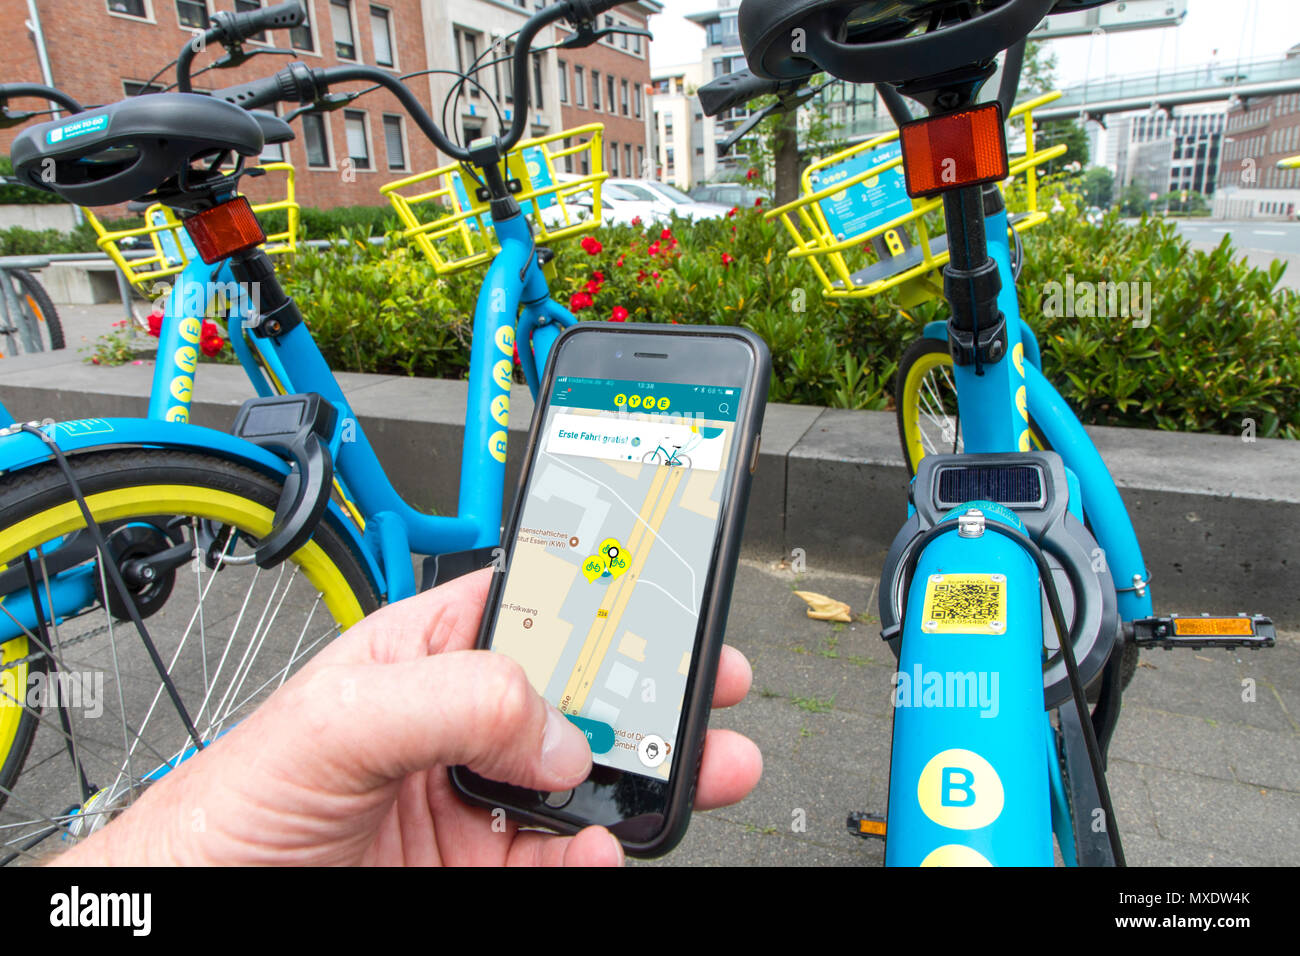 Rent bike, share bike, rental bikes by the provider Byke, here in Essen, Germany, rent the bike via app, the ride is billed in time interval, you can  Stock Photo